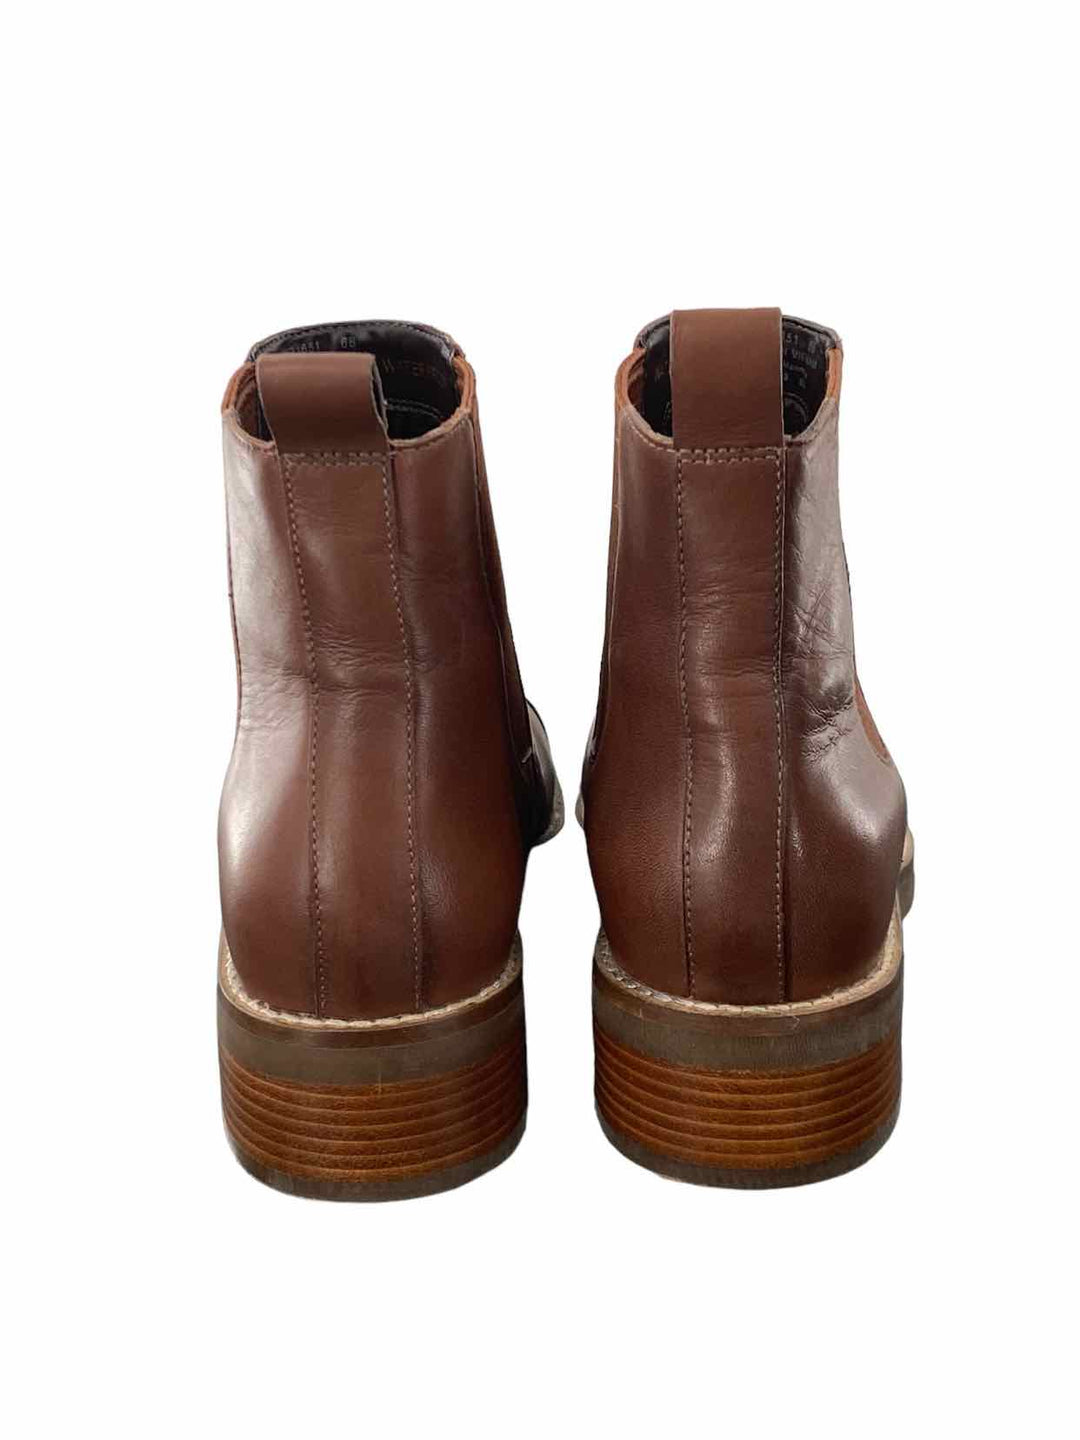 Cole Haan Shoe Size 6 Brown Waterproof Boots(Ankle)